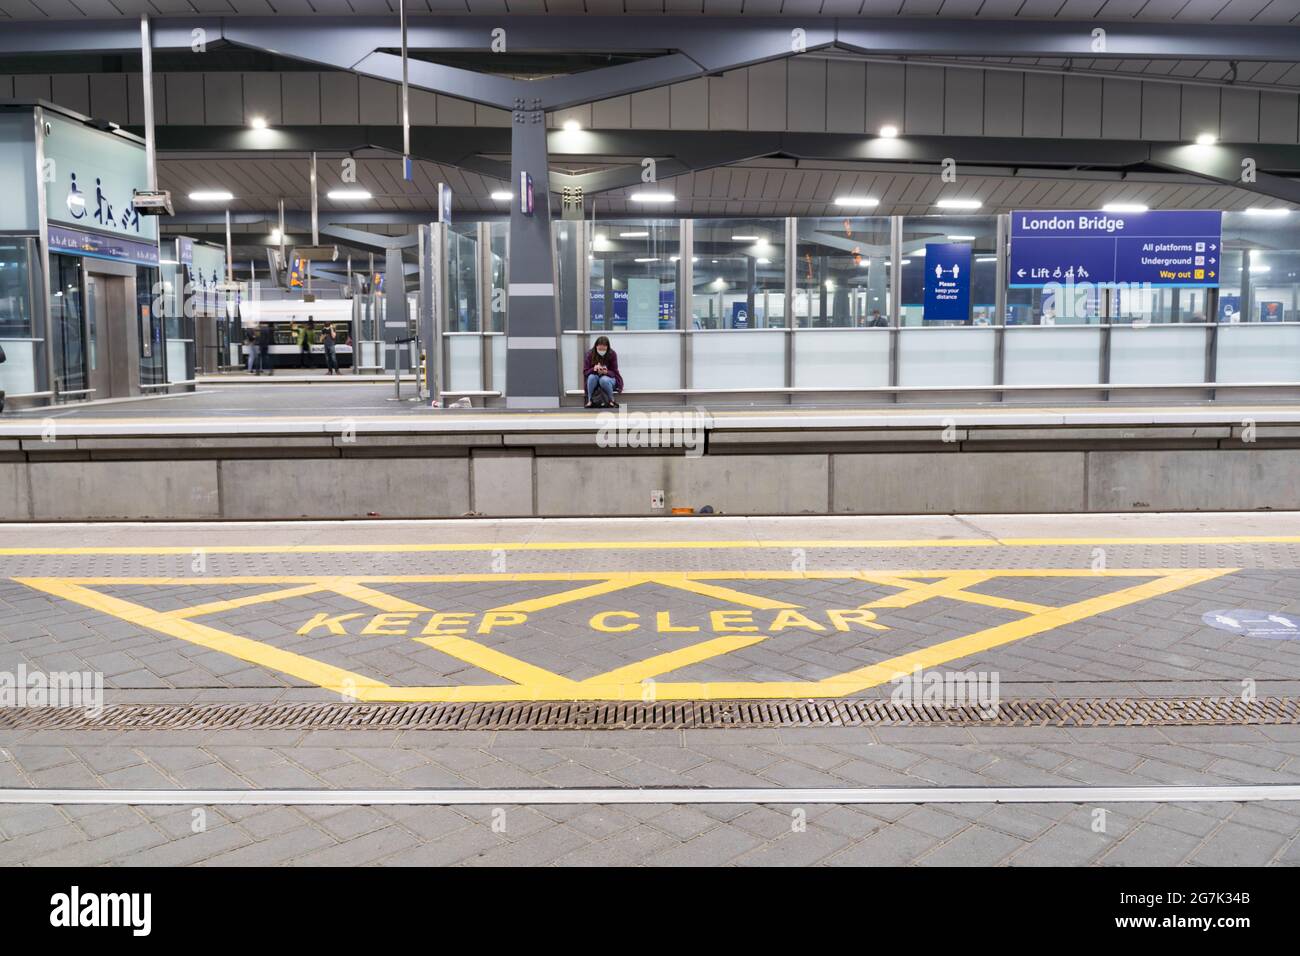 keep clear sign in yellow color painted on platform in London bridge station England UK Stock Photo